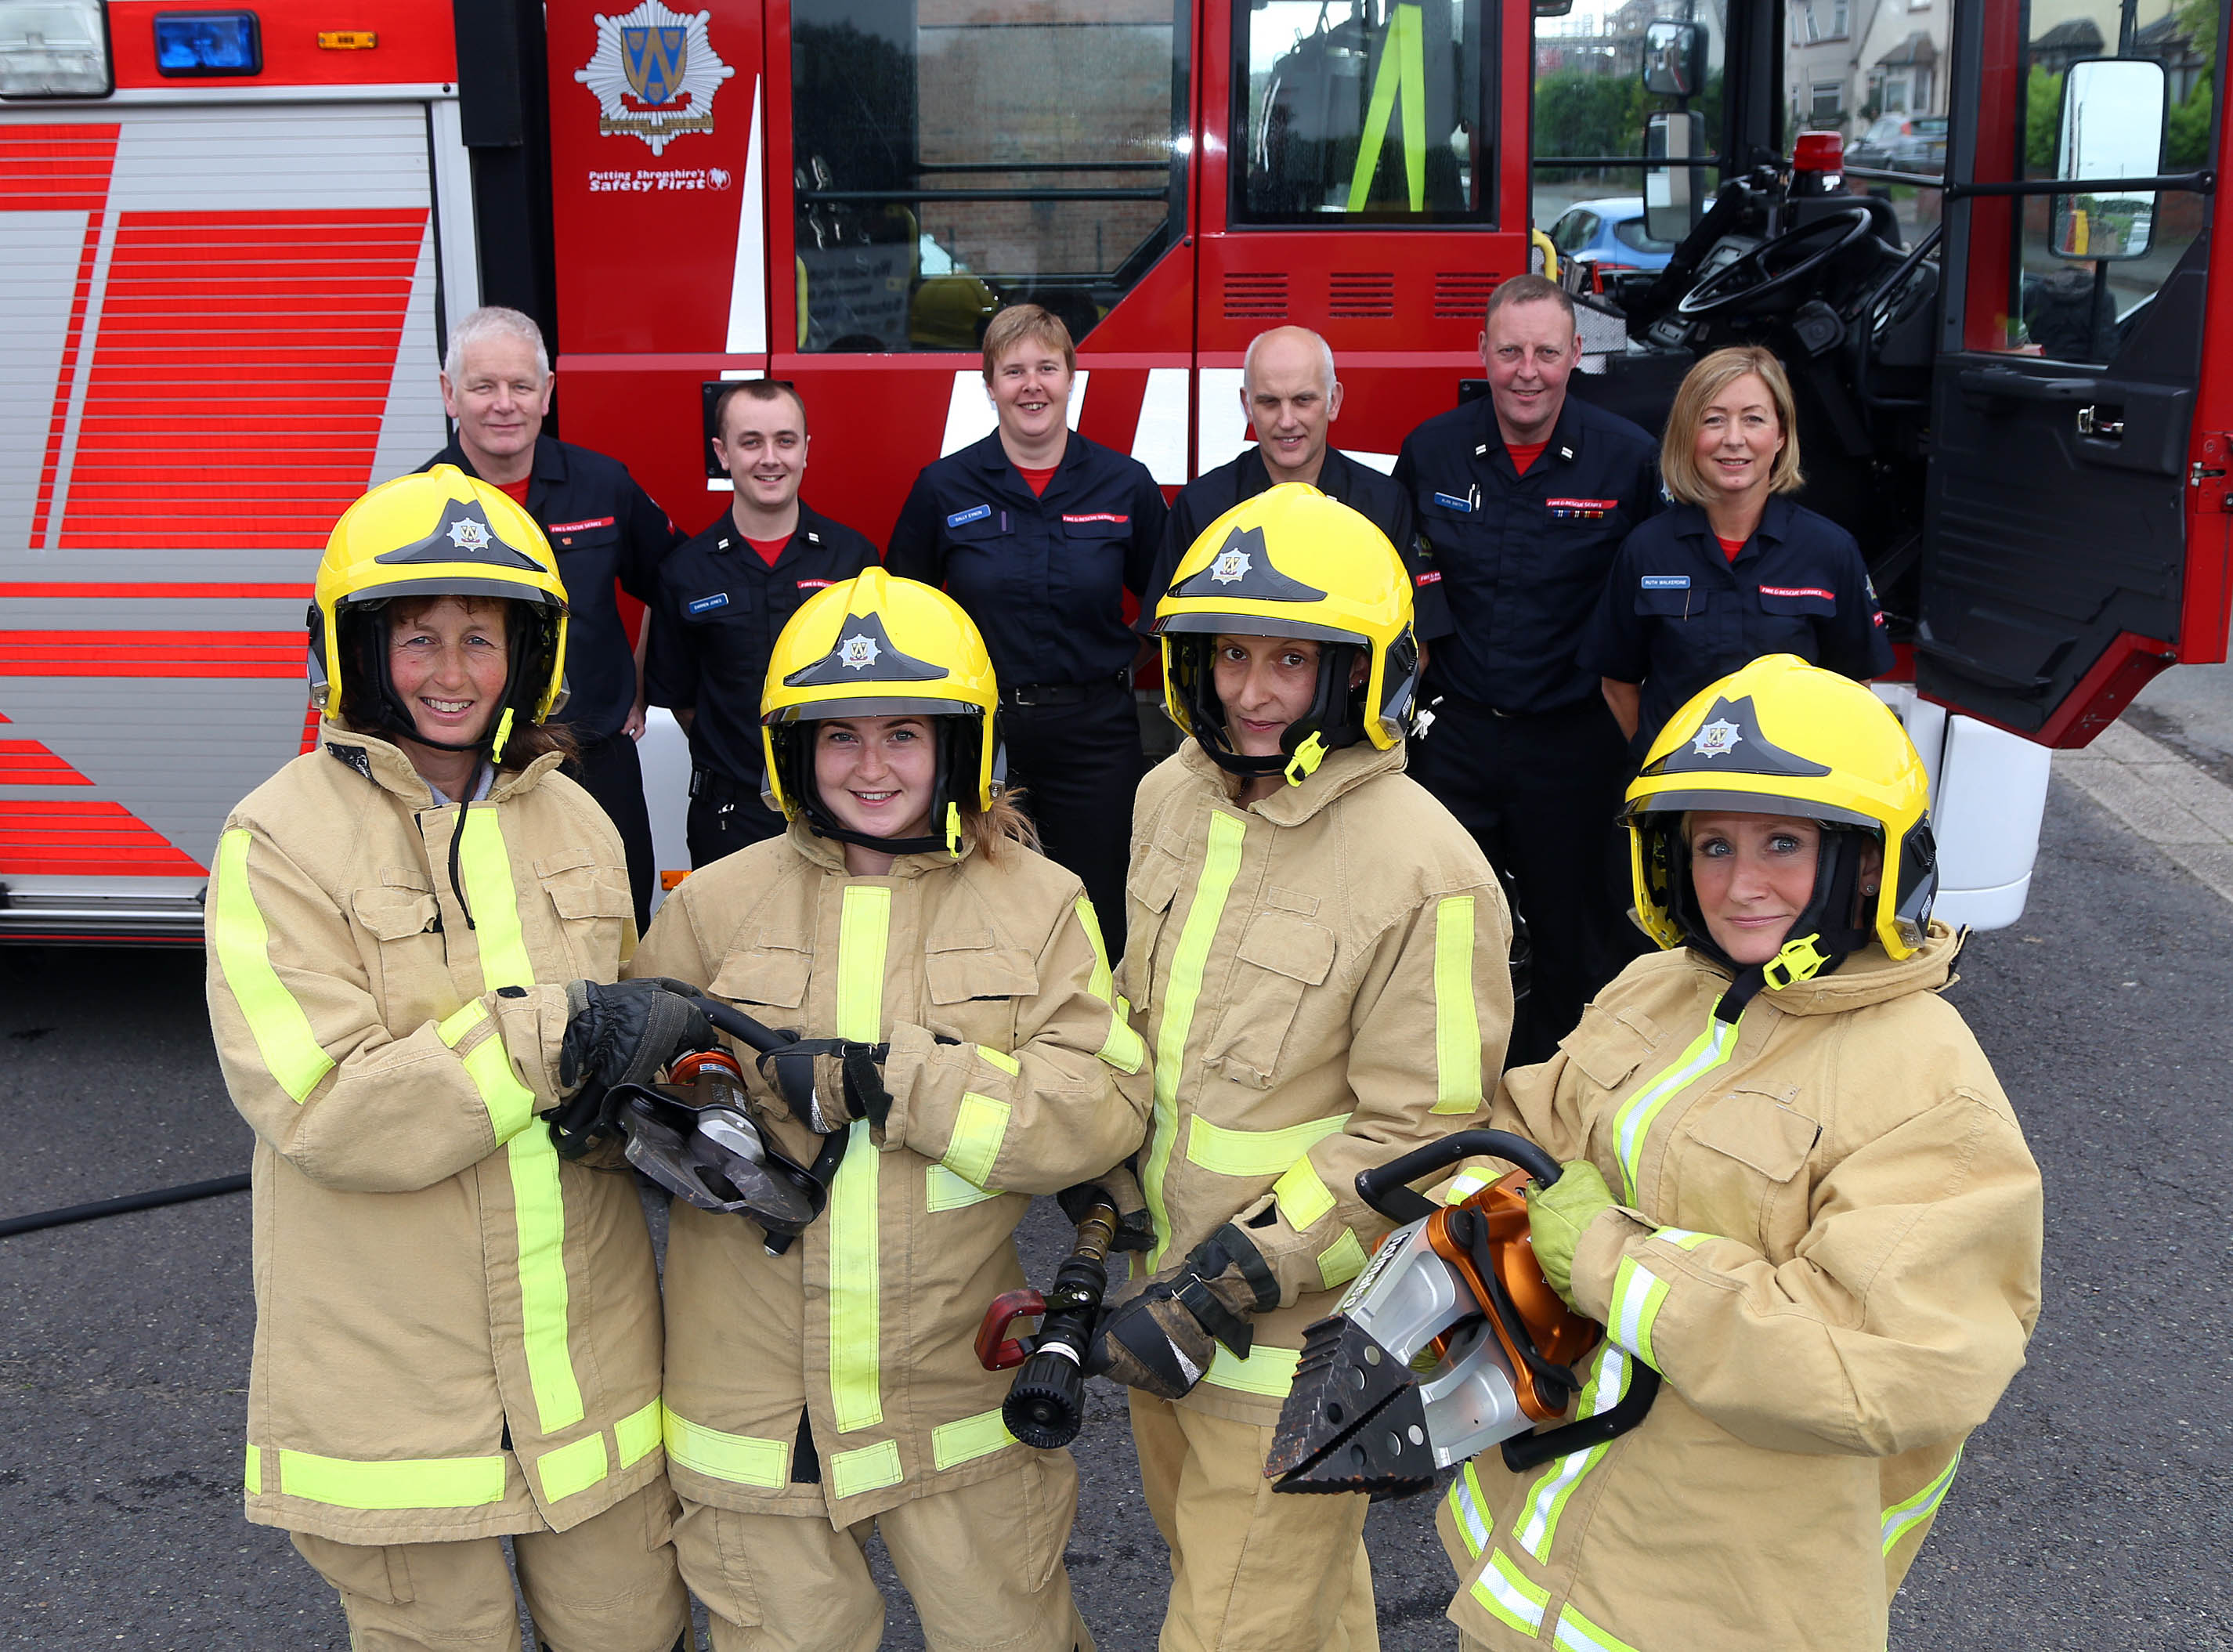 The "taster" day for firefighters at Prees Fire Station